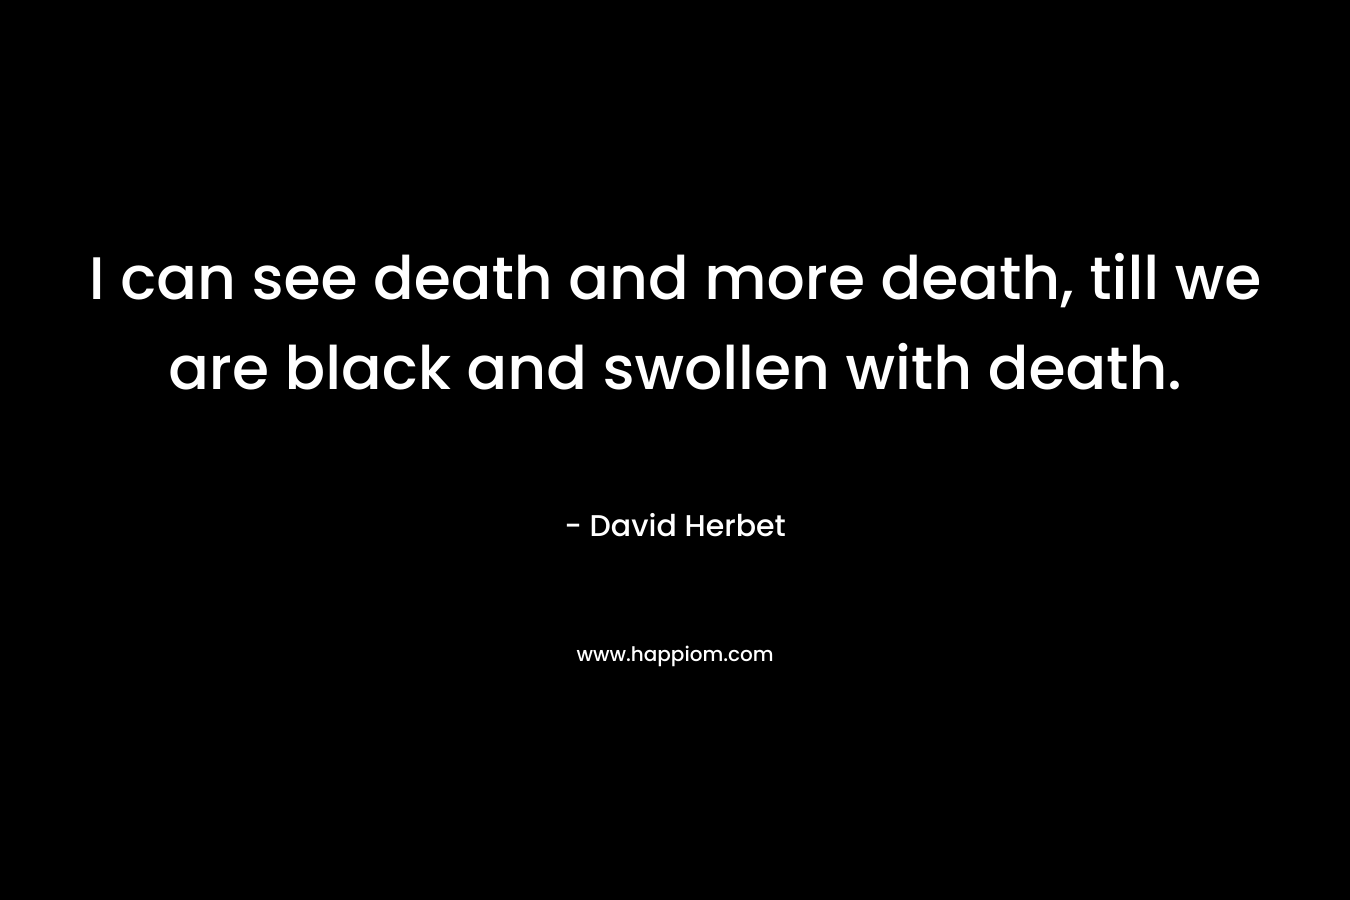 I can see death and more death, till we are black and swollen with death.